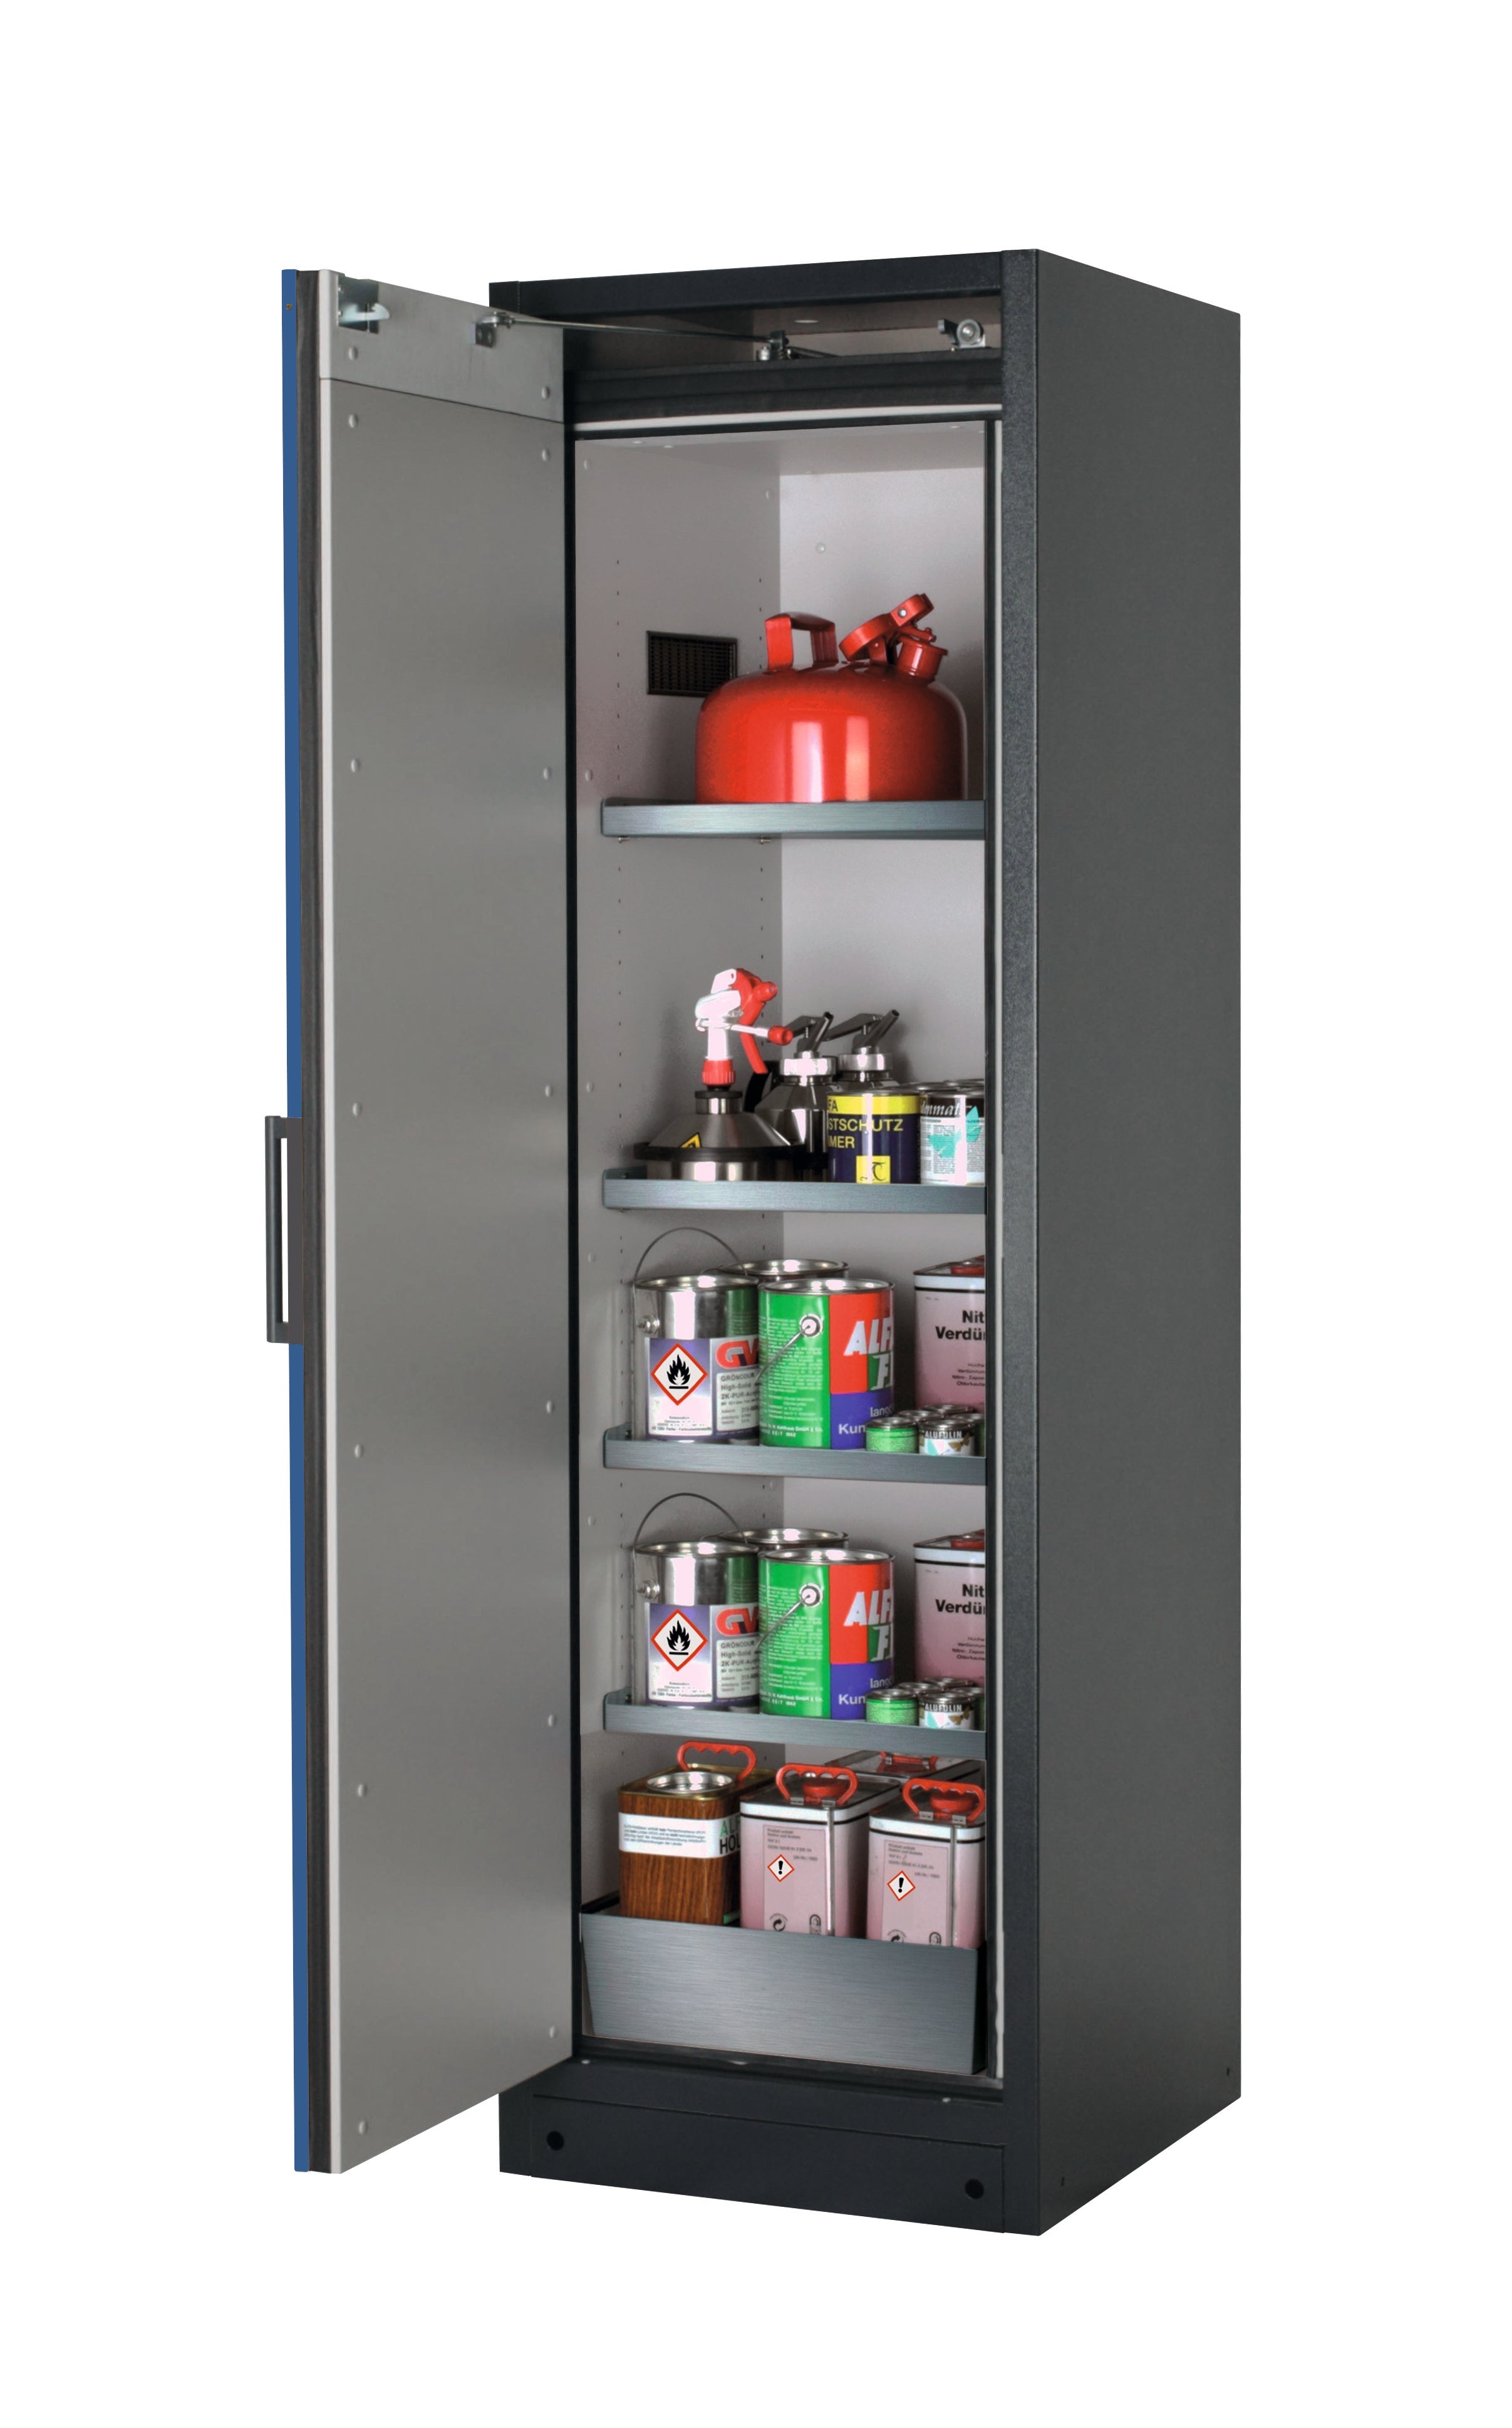 Type 90 safety storage cabinet Q-CLASSIC-90 model Q90.195.060 in gentian blue RAL 5010 with 4x shelf standard (stainless steel 1.4301),